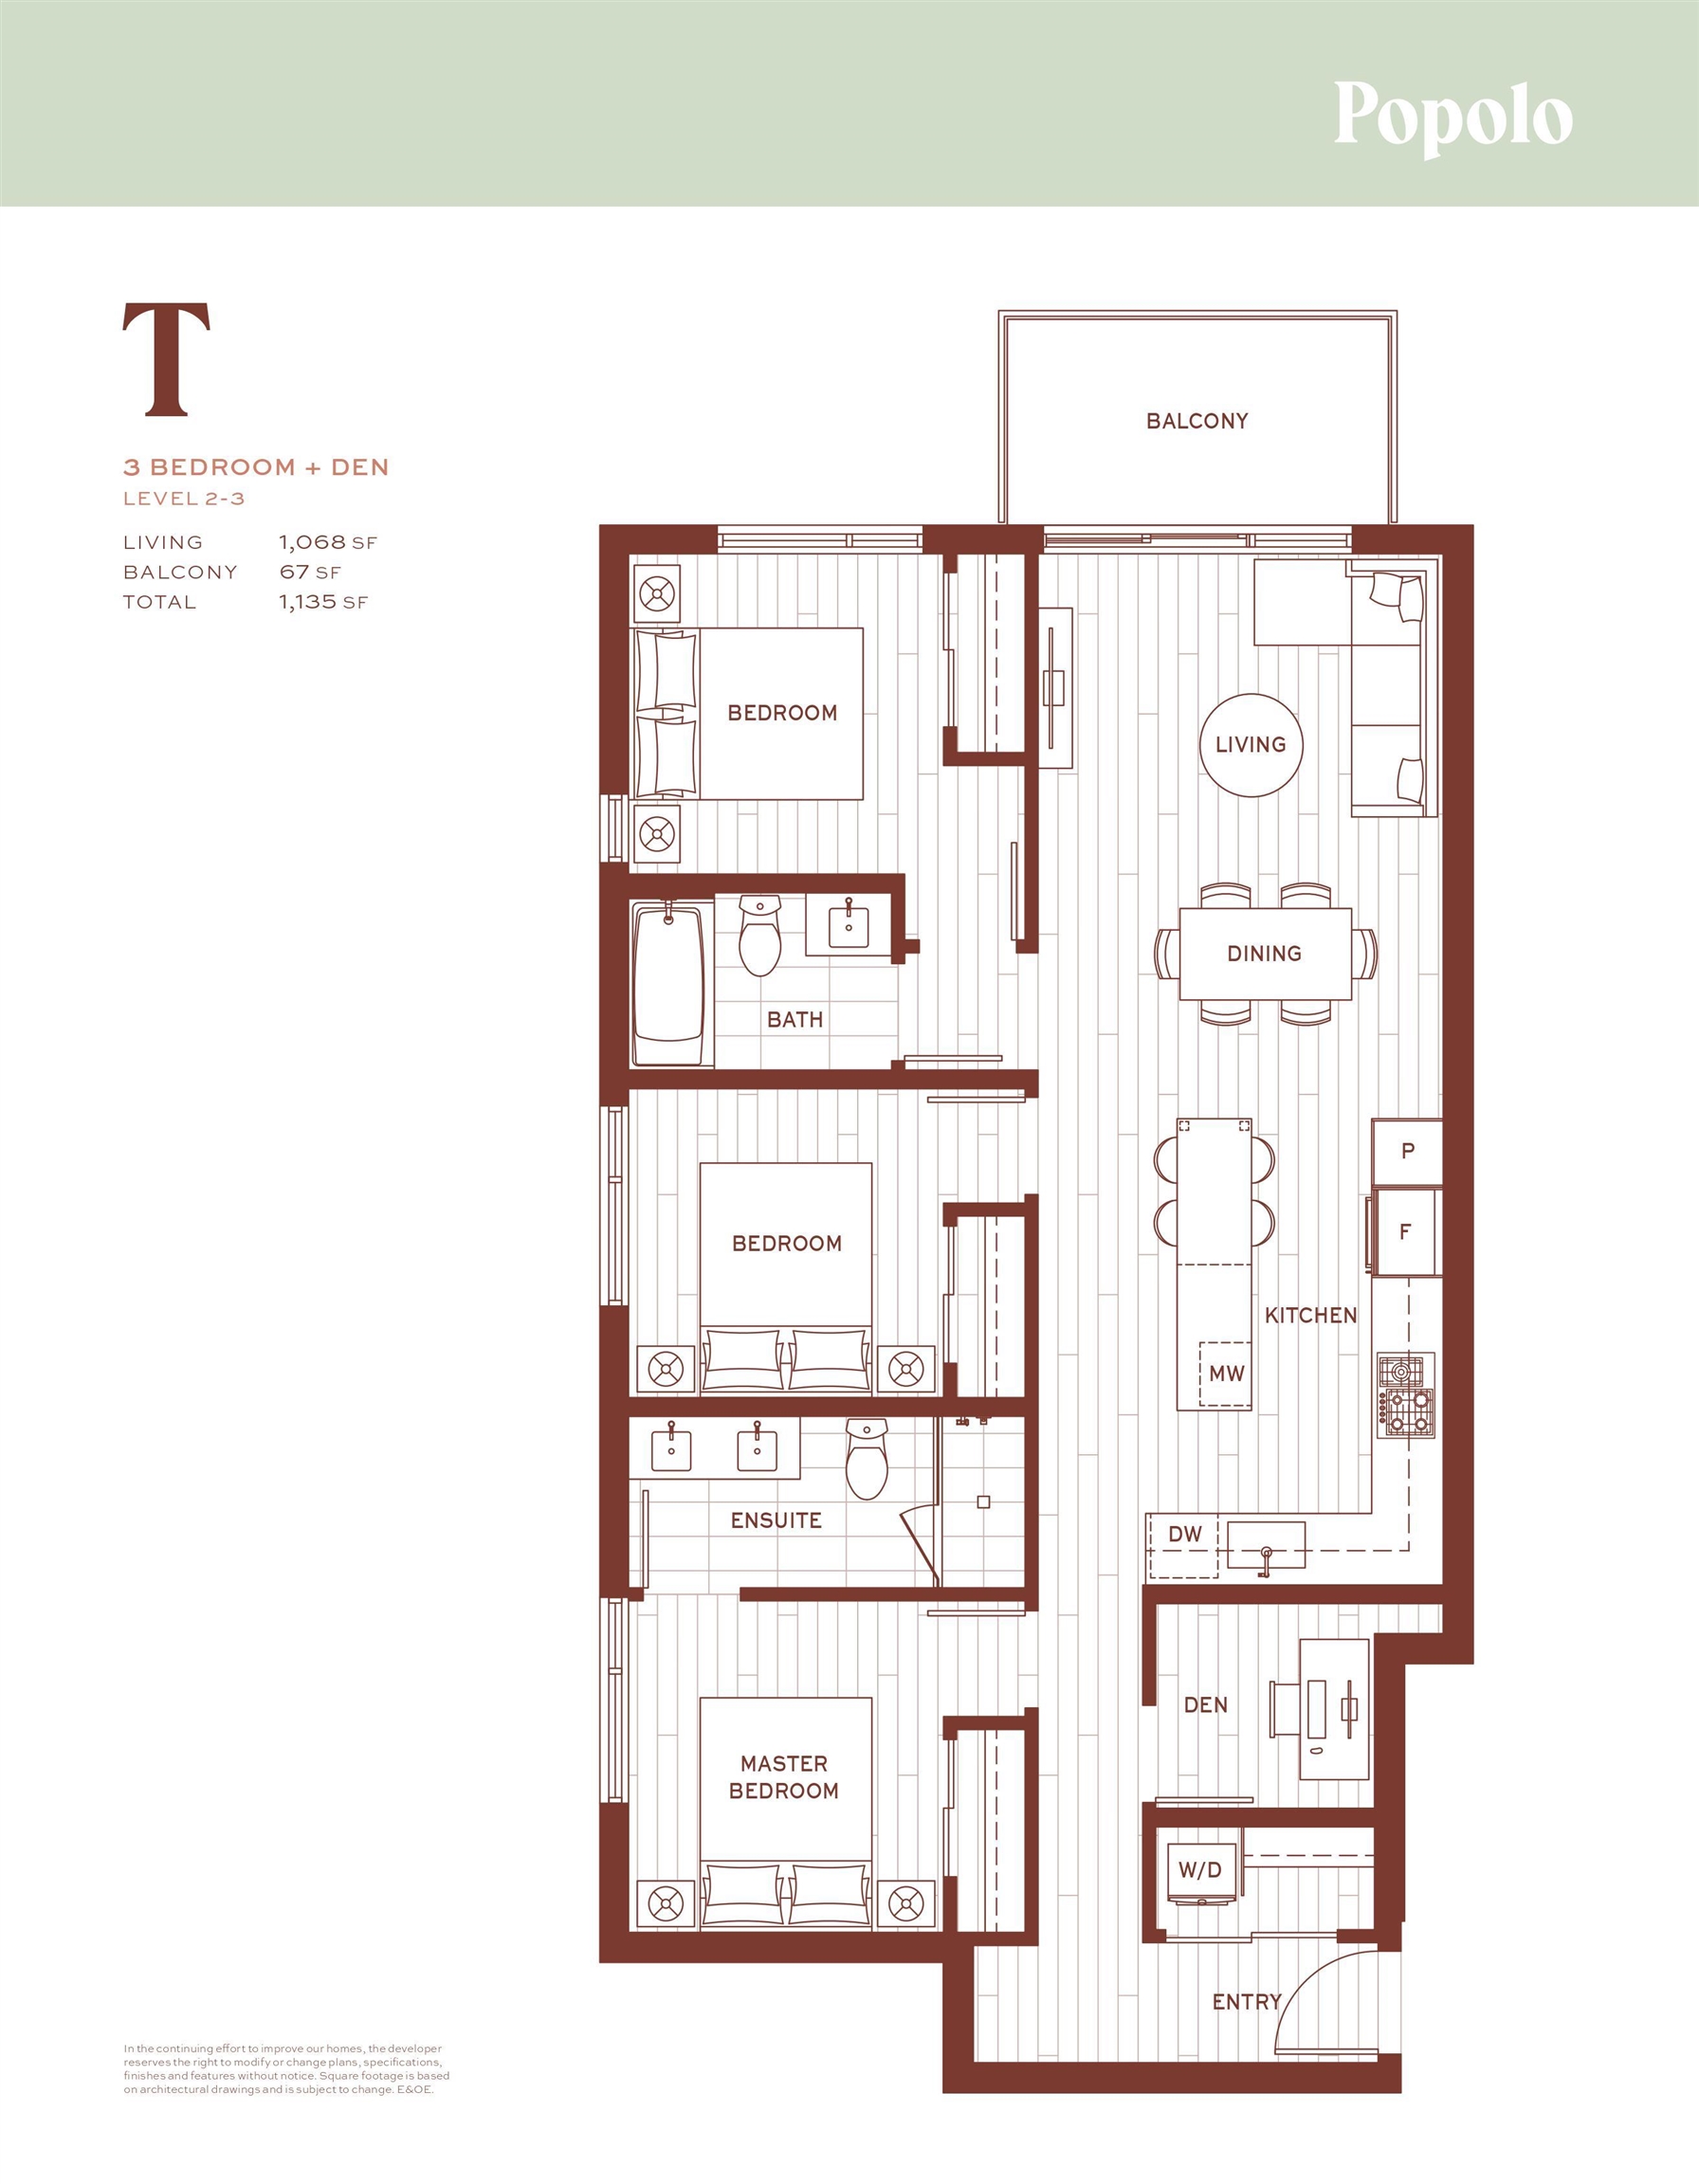 310 Floor Plan of Popolo Condos with undefined beds